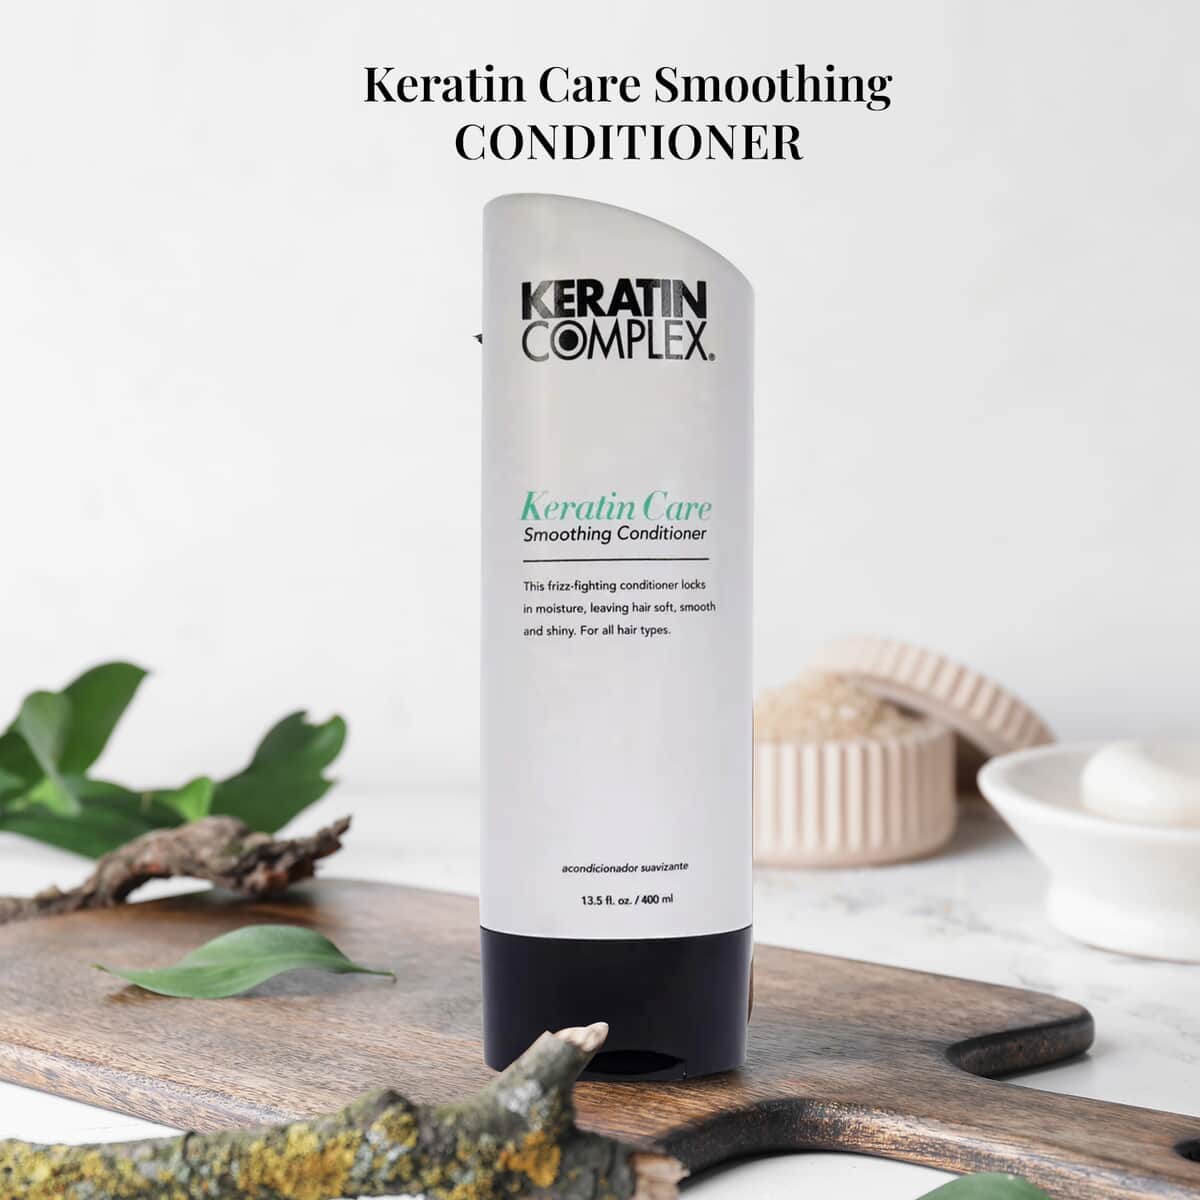 Keratin Care Smoothing Conditioner by Keratin Complex -13.5 oz image number 1